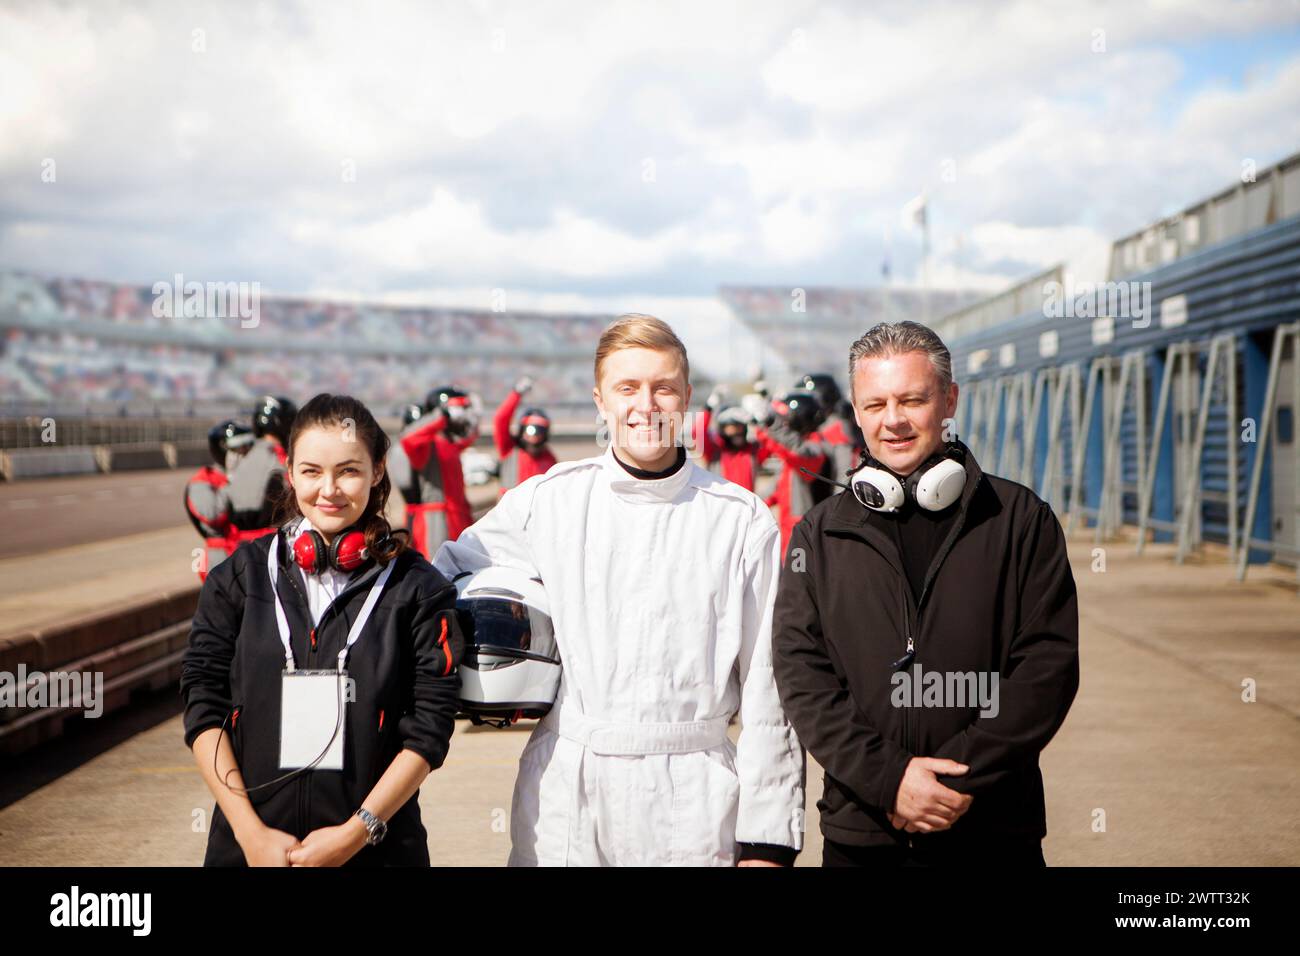 A smiling racing team ready for action on the track. Stock Photo